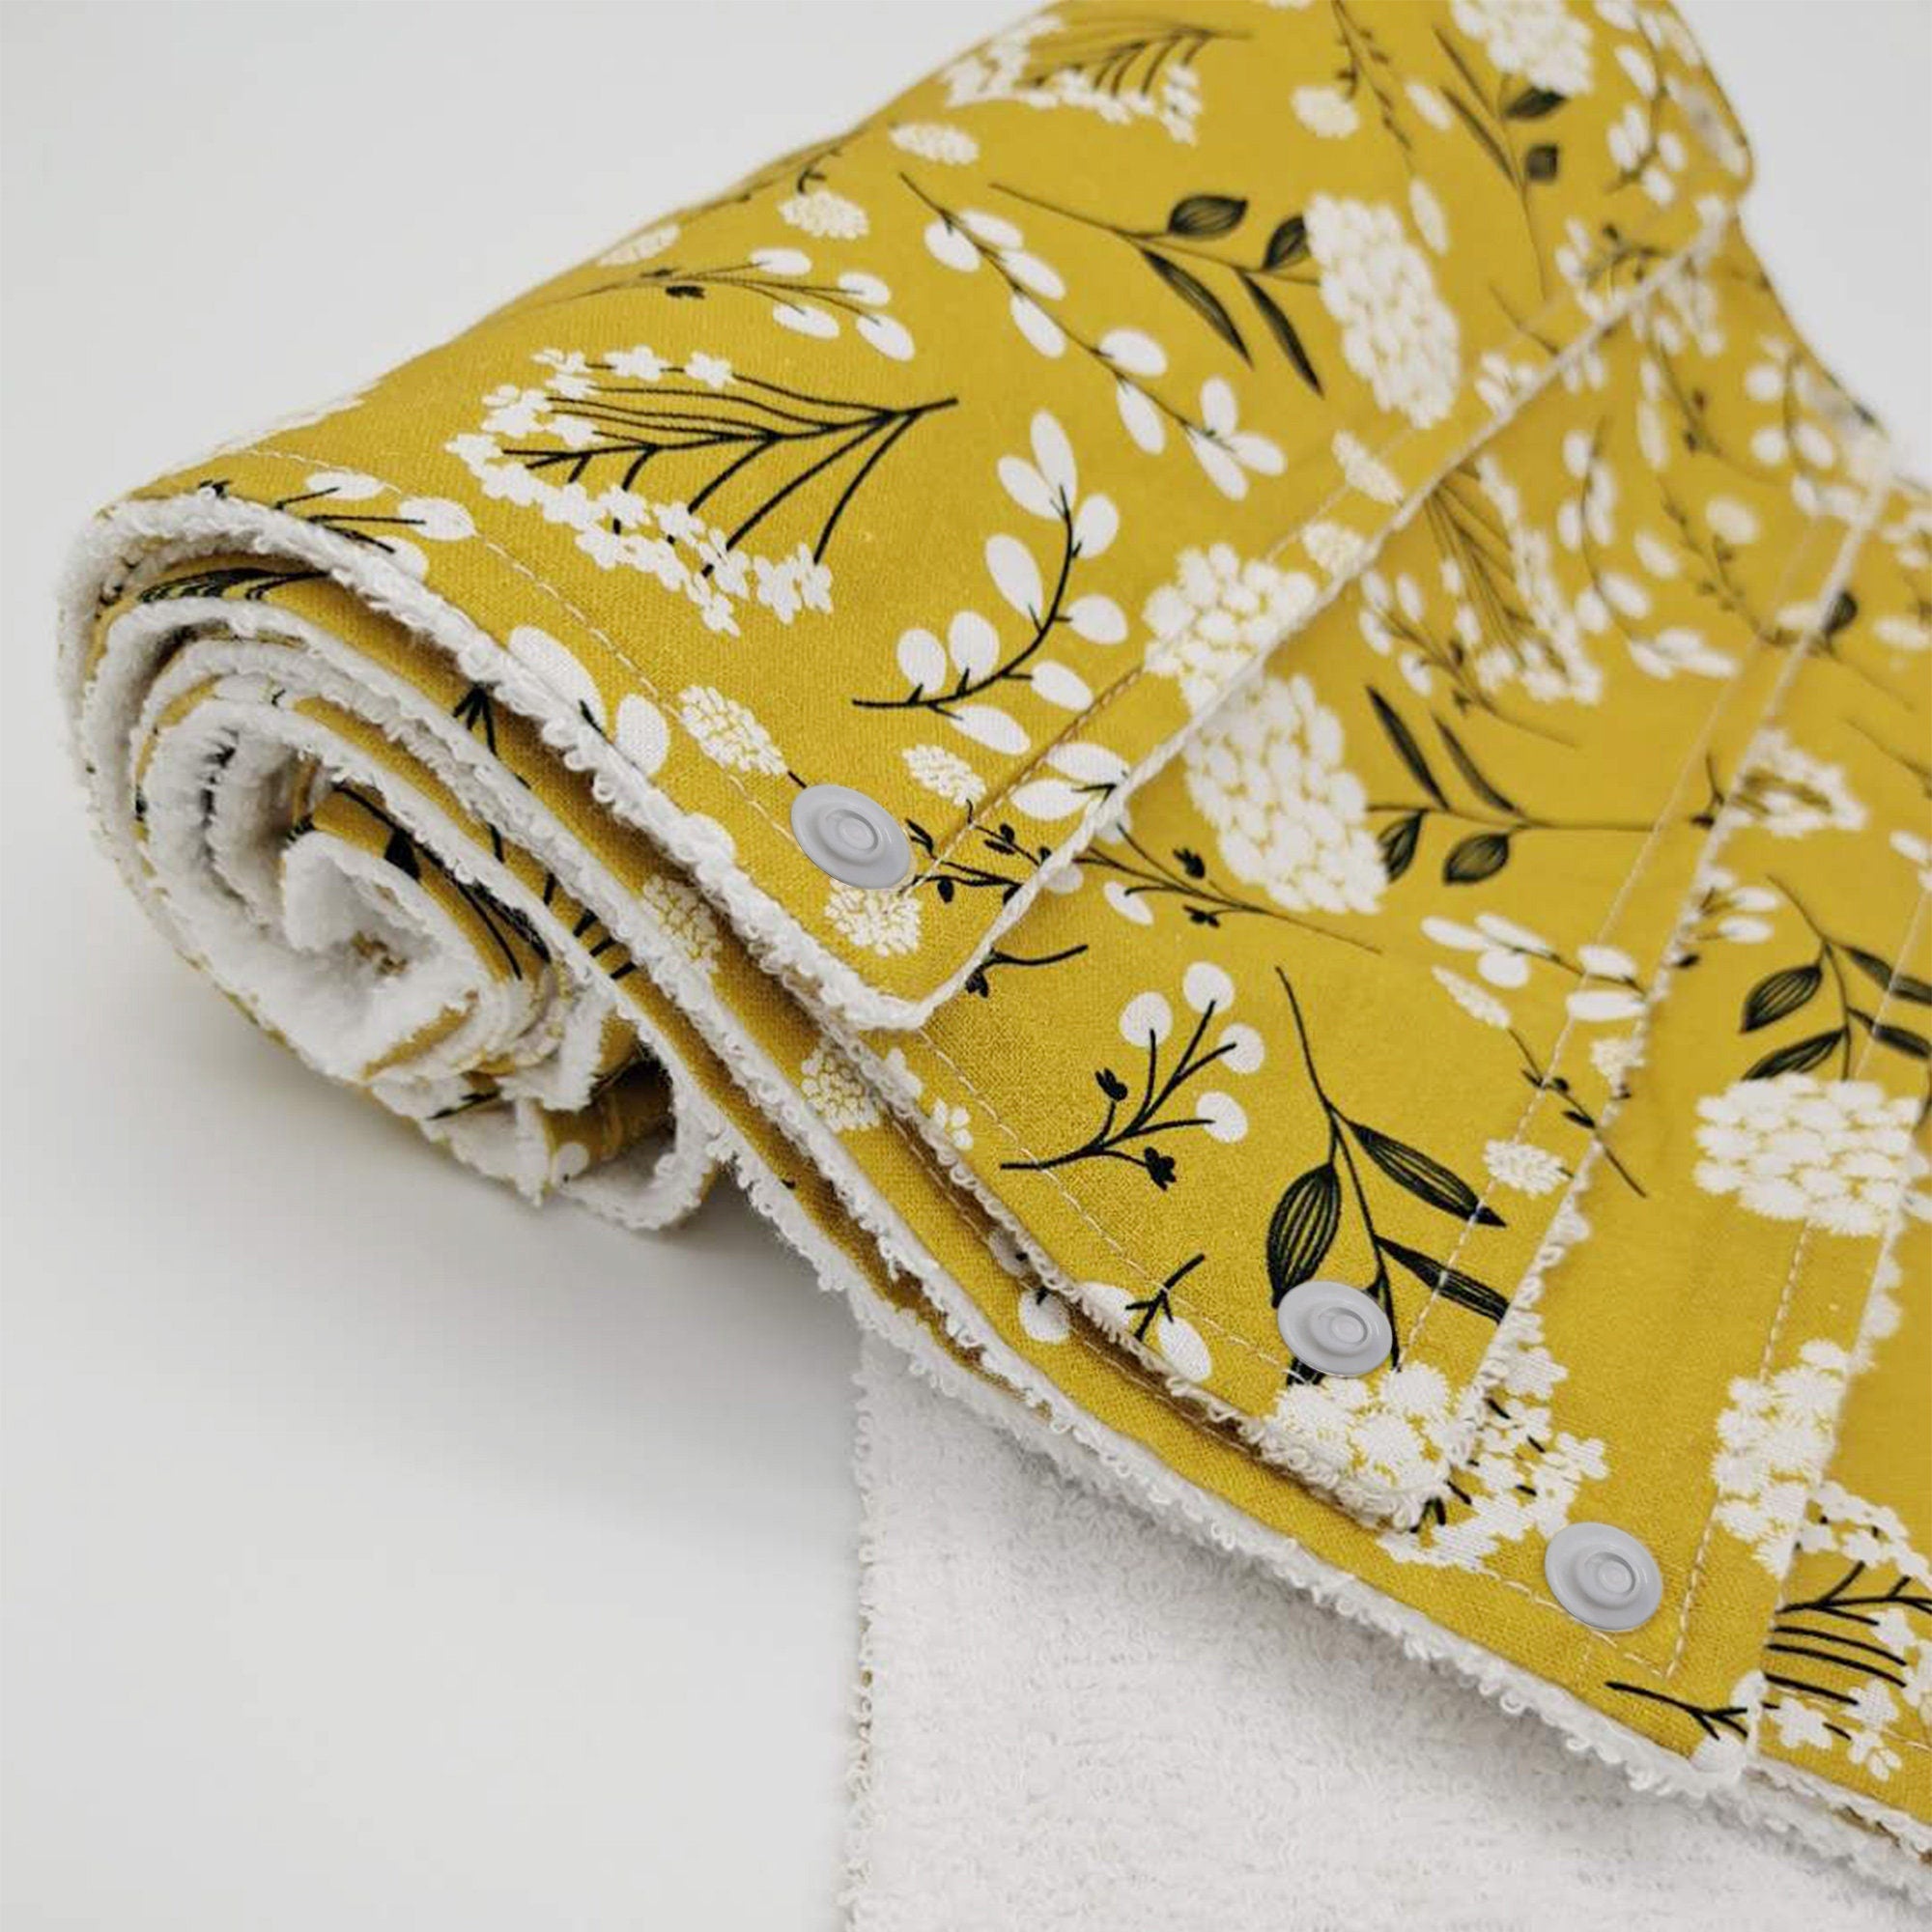 Paperless Towels roll, Zero Waste, Paperless Towels, Kitchen Clothes, Dish Towels ,Pre-Rolled Reusable paper towels, Yellow dandelion